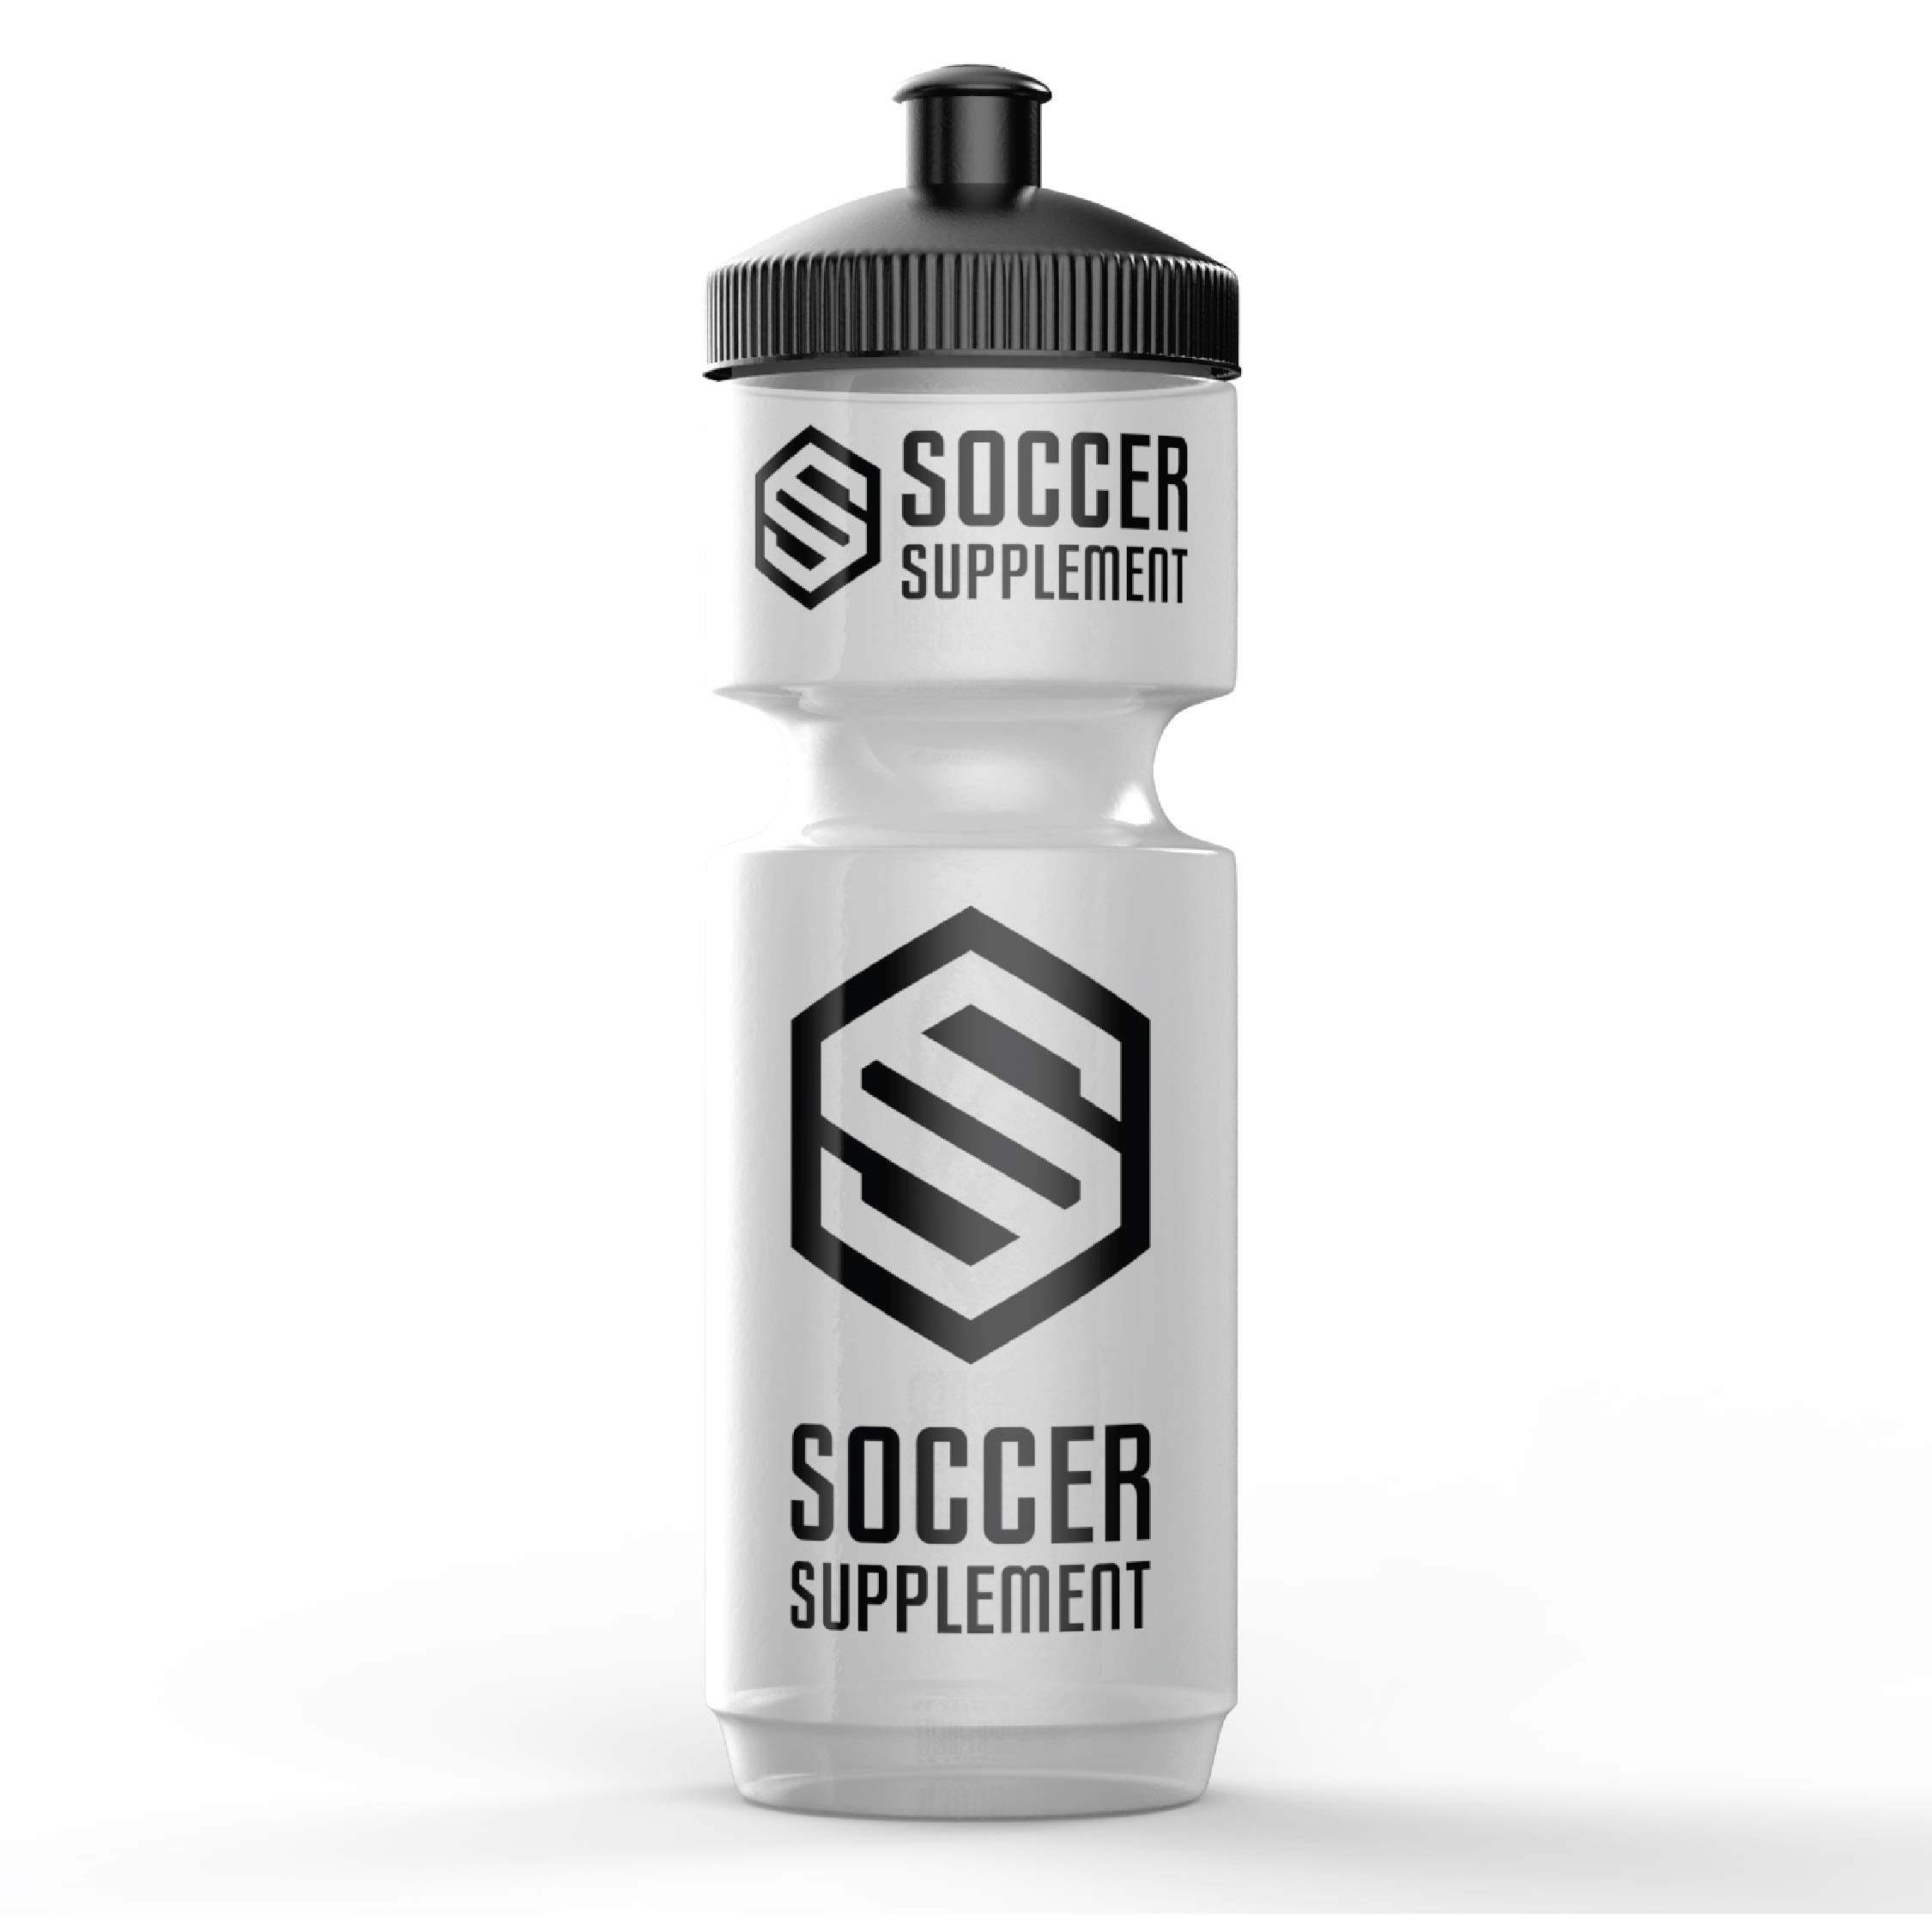 SOCCER SUPPLEMENT - 750ml Sports Bottle - Easy squeeze - Dishwasher Safe - Premium Sports Cap (Clear, 750ml)